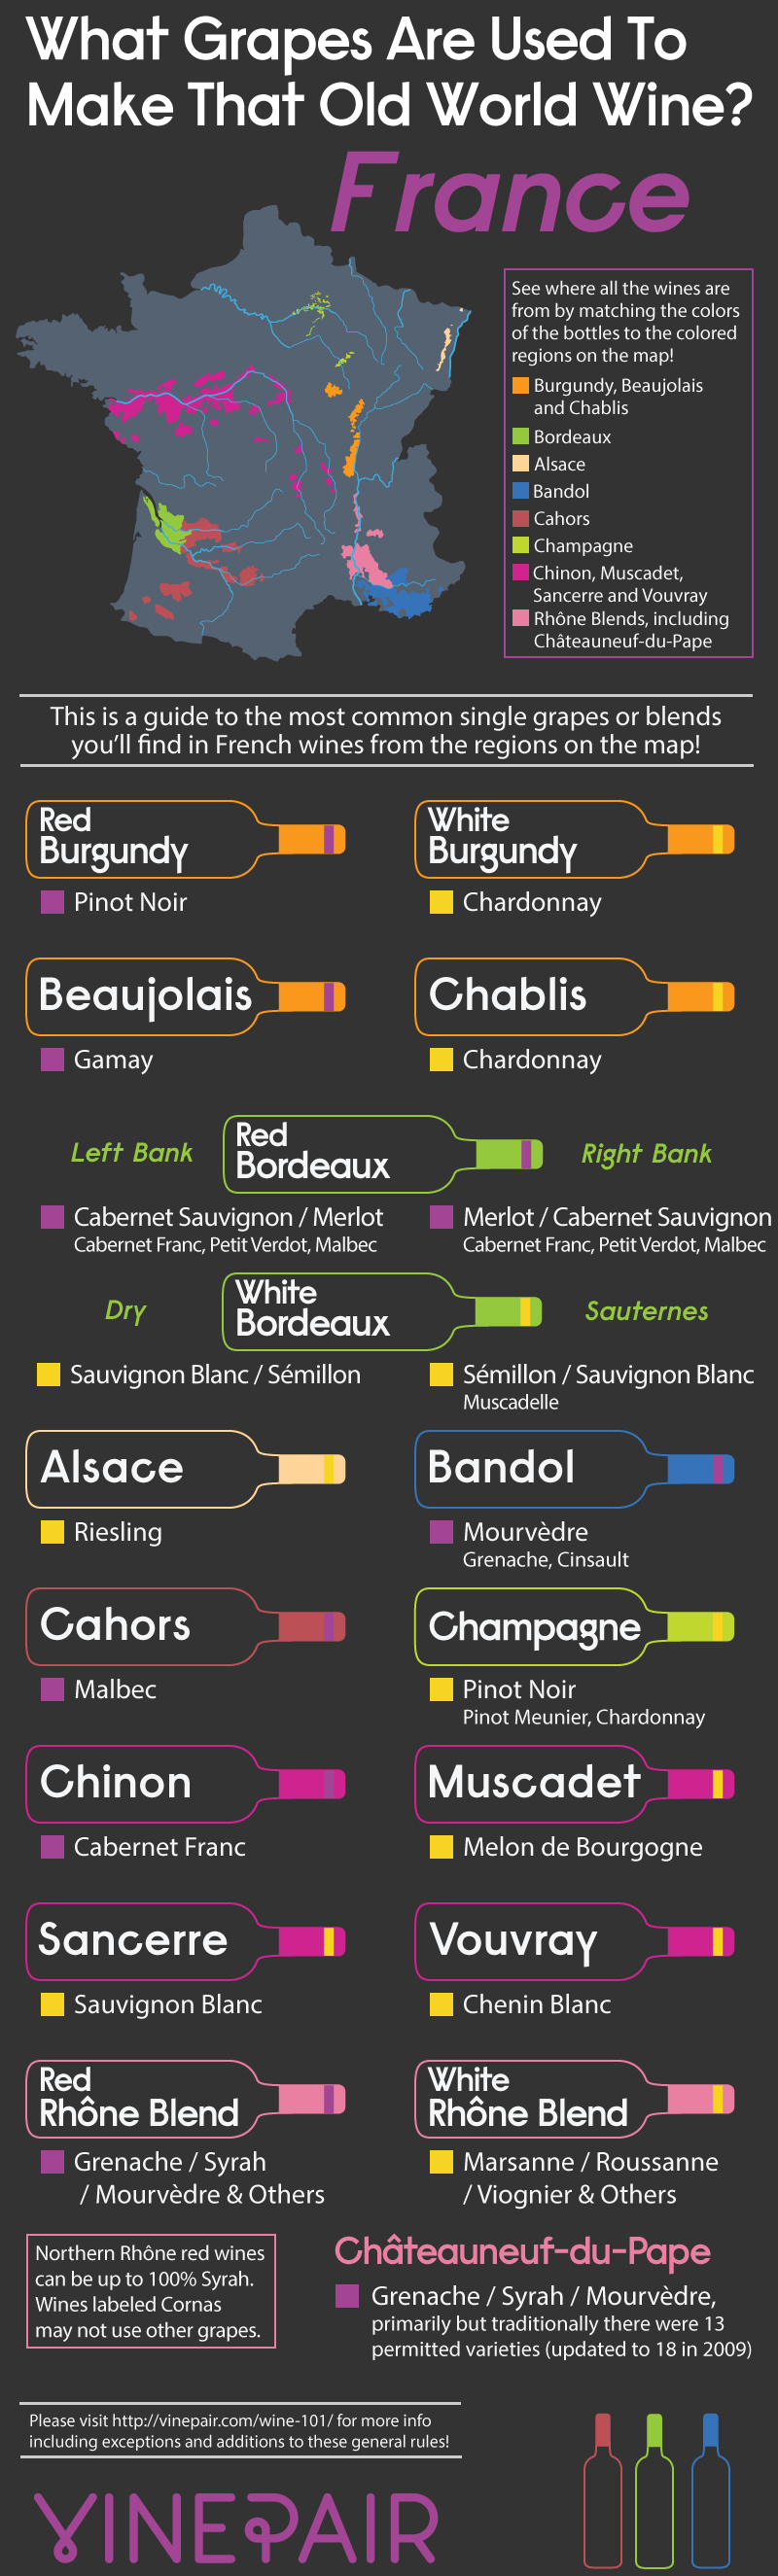 What Grapes Are Used To Make That Old World Wine: France